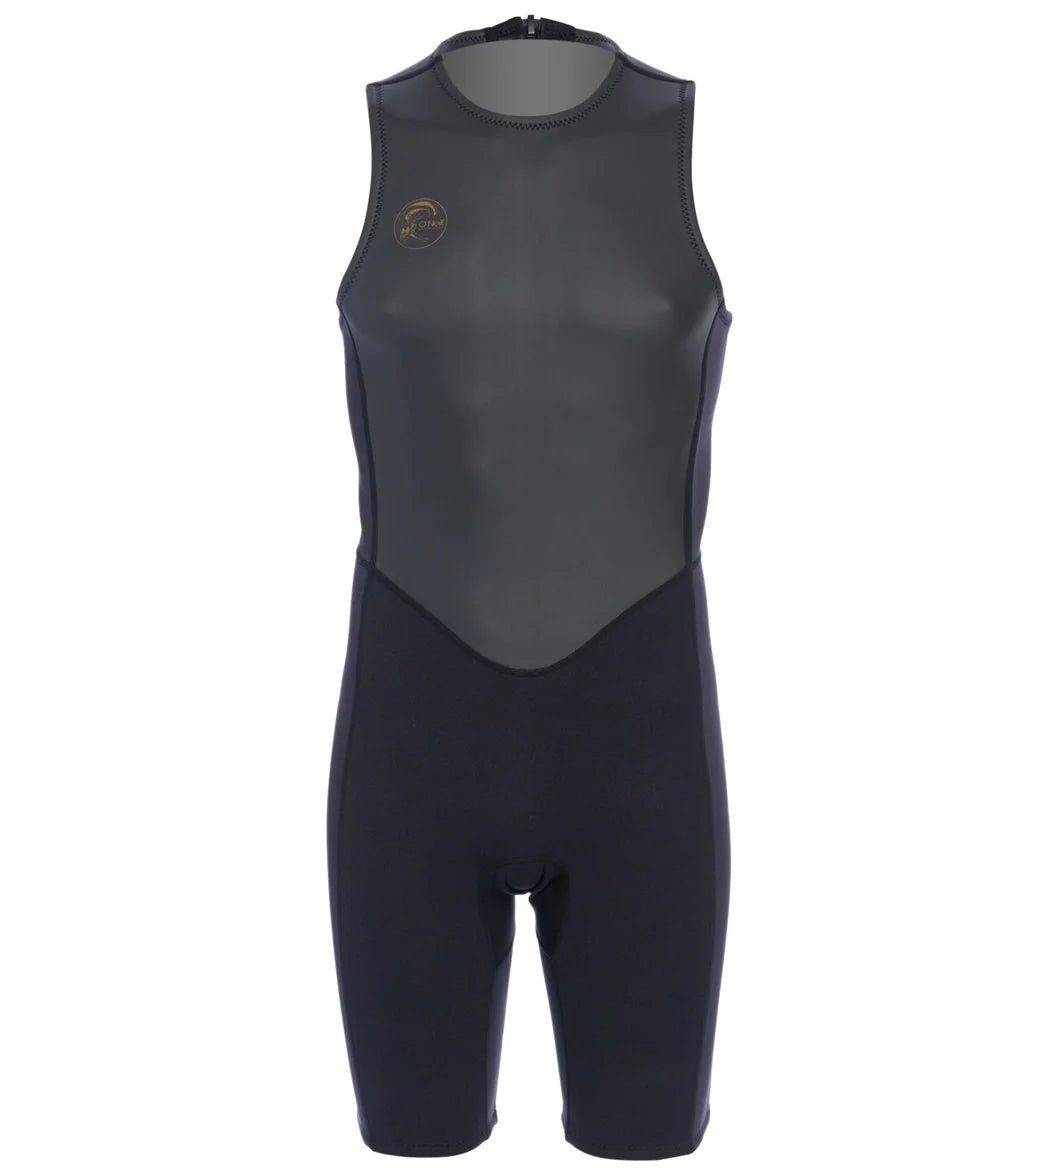 O’Neill Original 2mm Shorty - Worthing Watersports - 4529 - Wetsuits - O'Neill